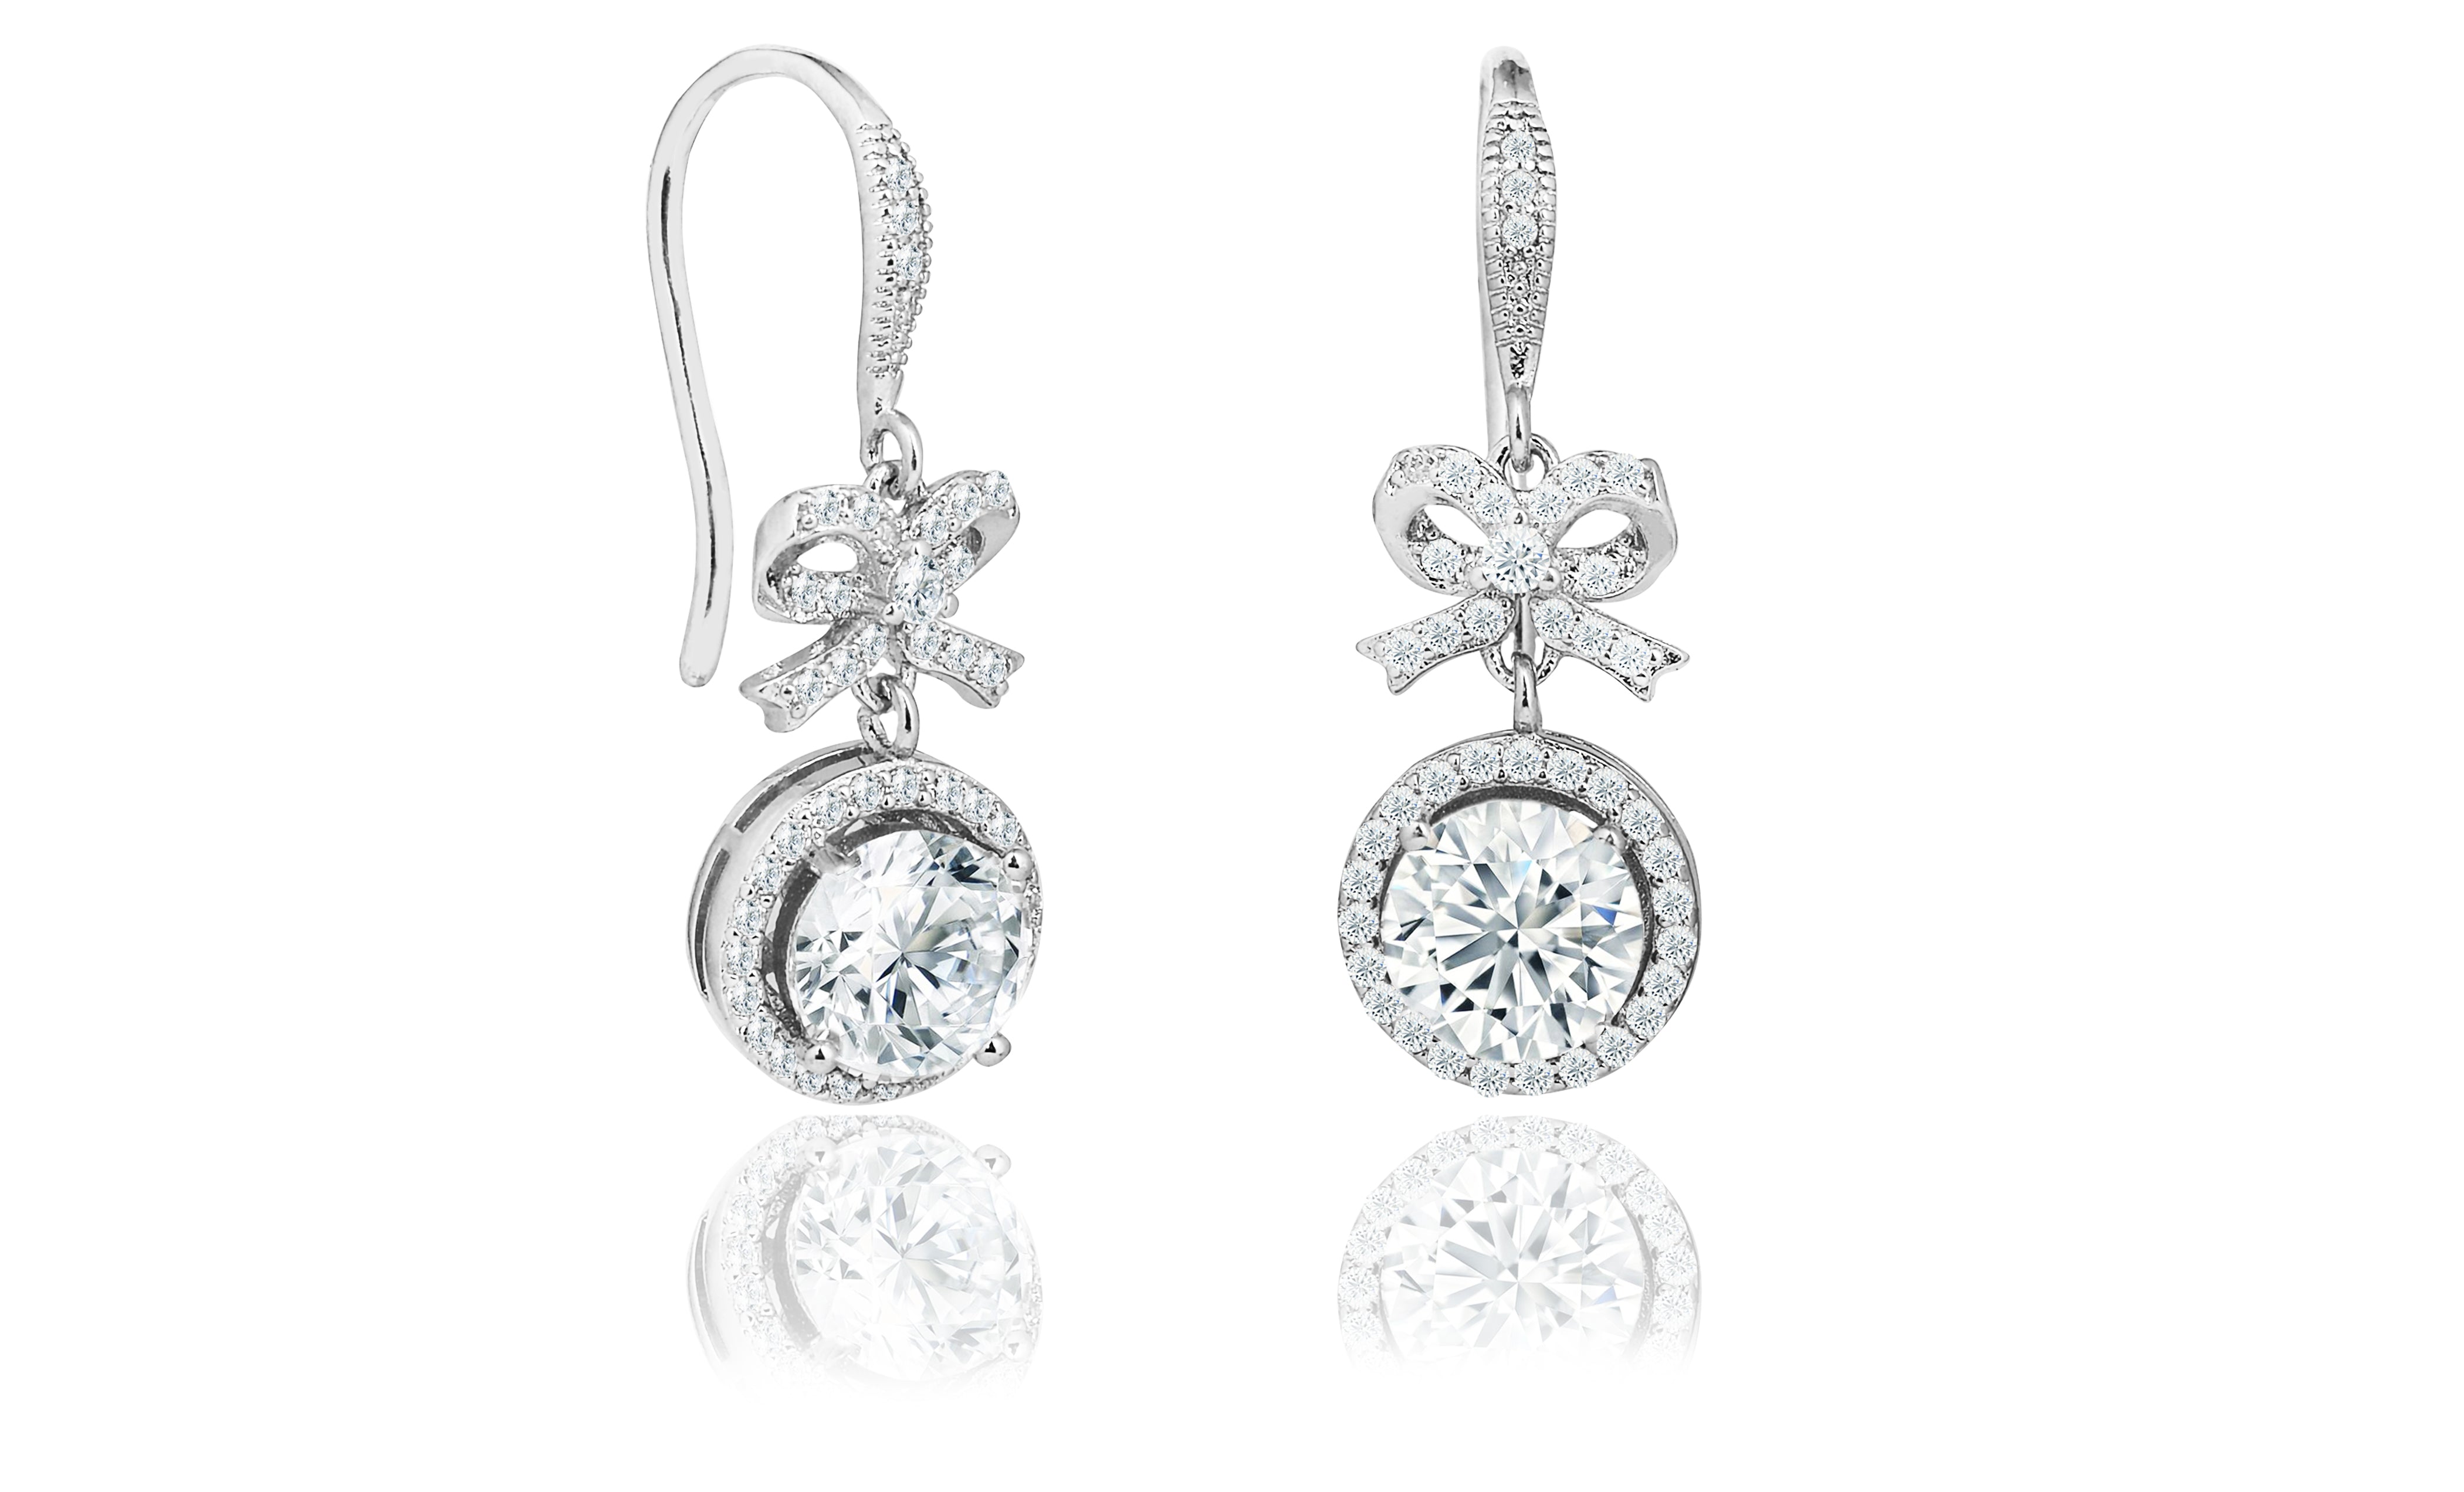 Seraphina 18k White Gold Plated Silver Bow Halo Drop Earrings with Simulated Diamond CZ Crystals